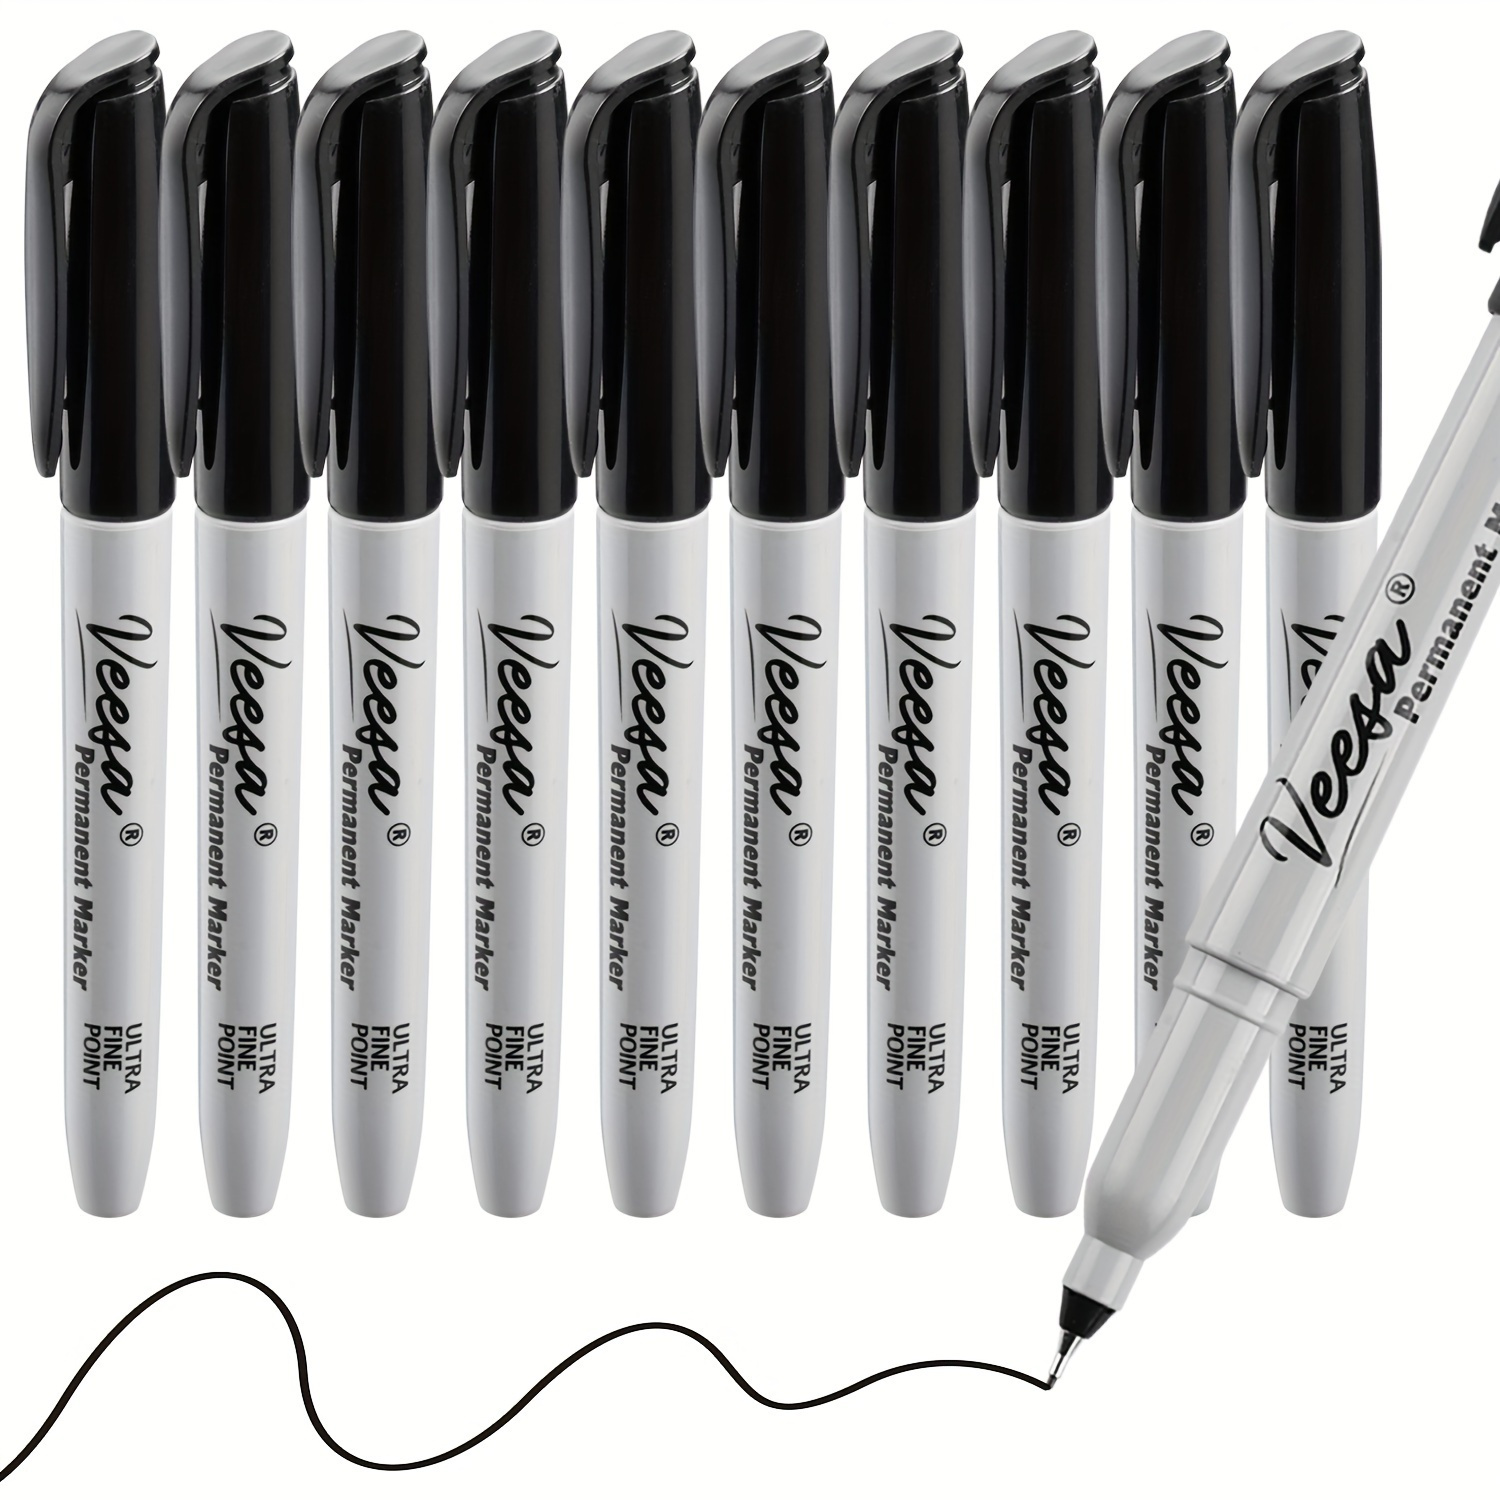 

10pcs Black Ultra Fine Point Permanent Markers Waterproof Fade-resistant Quick Drying For Writing Office School Home